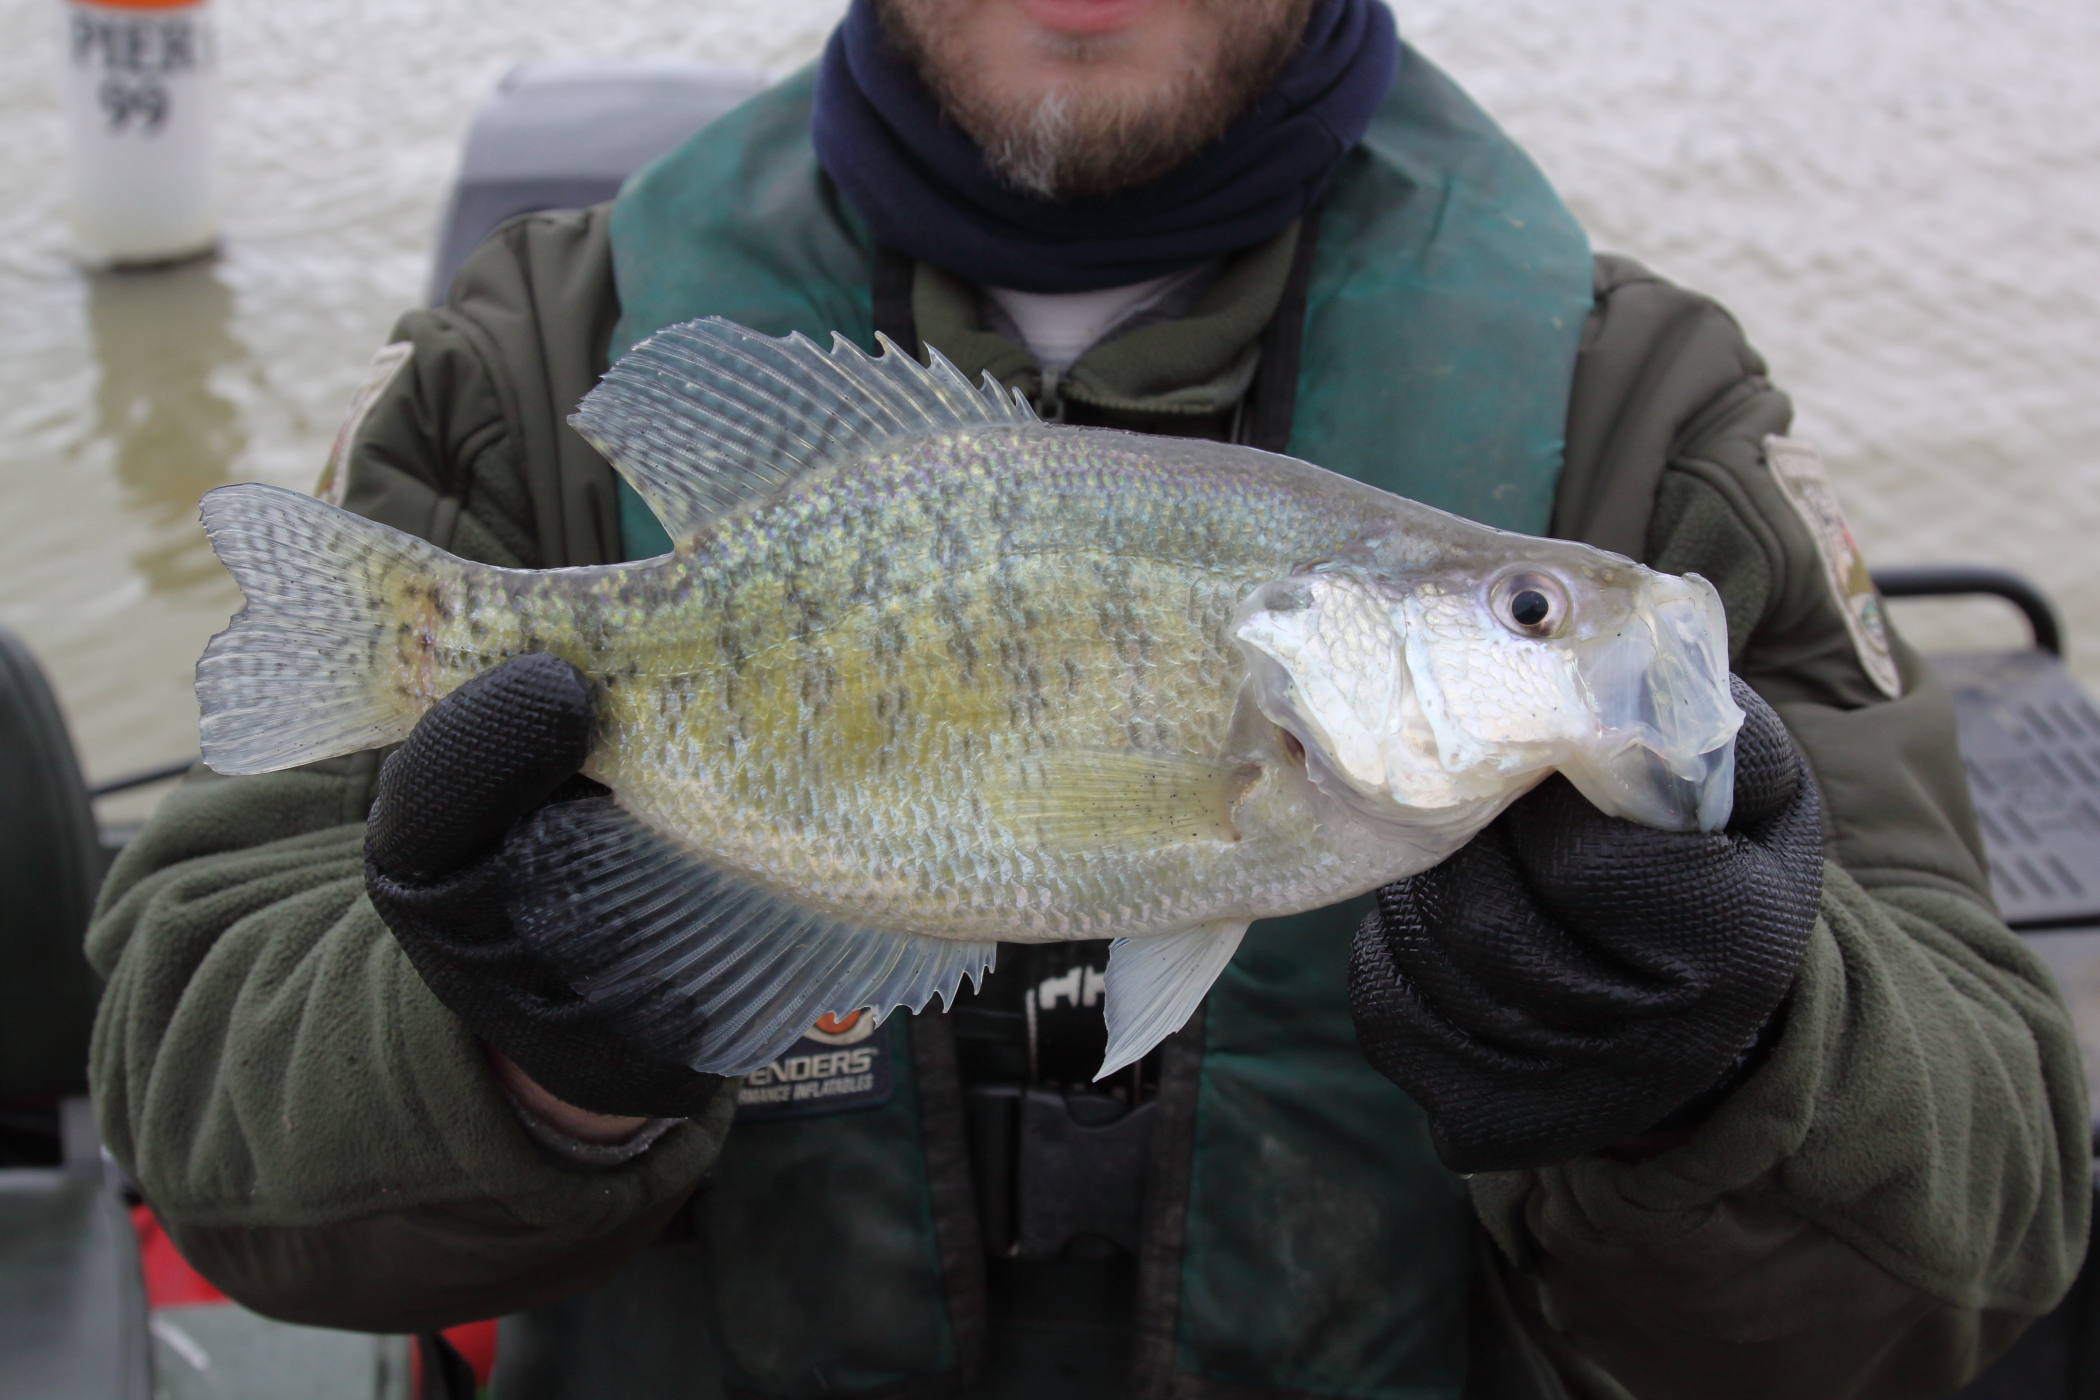 Hands are holding up a large white crappie